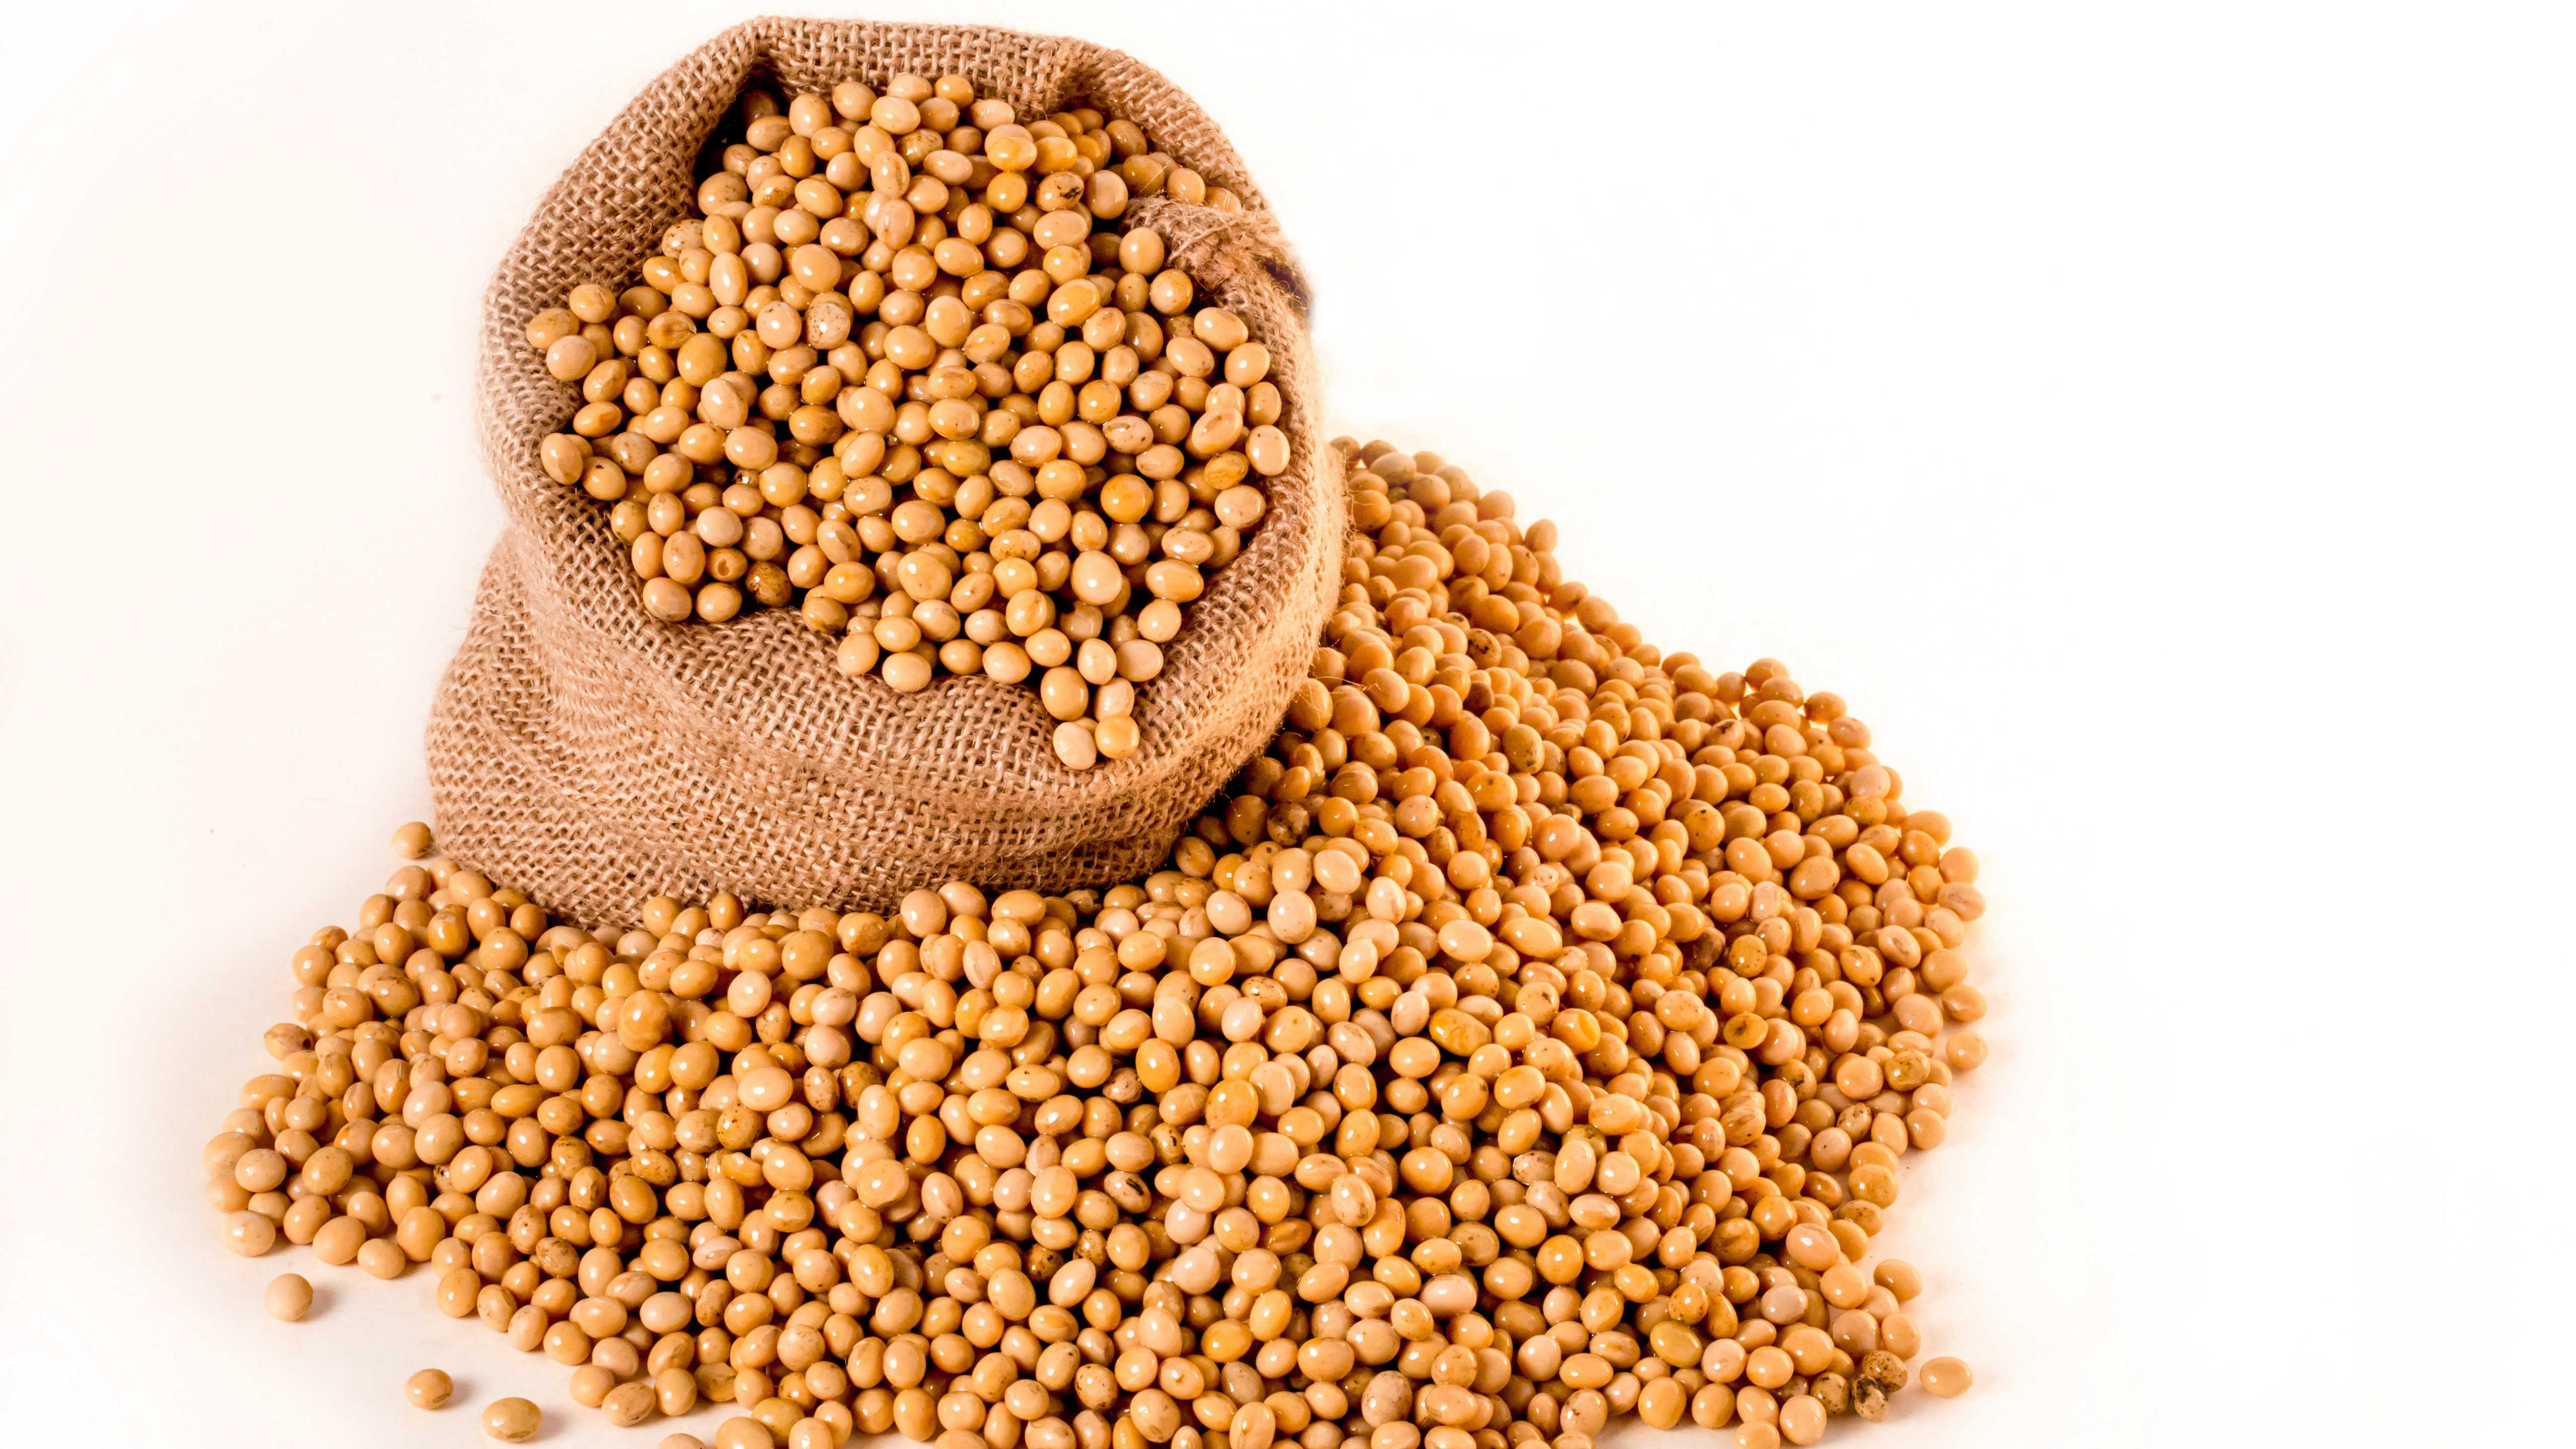 Brazil's soybean exports exceeded last year's total